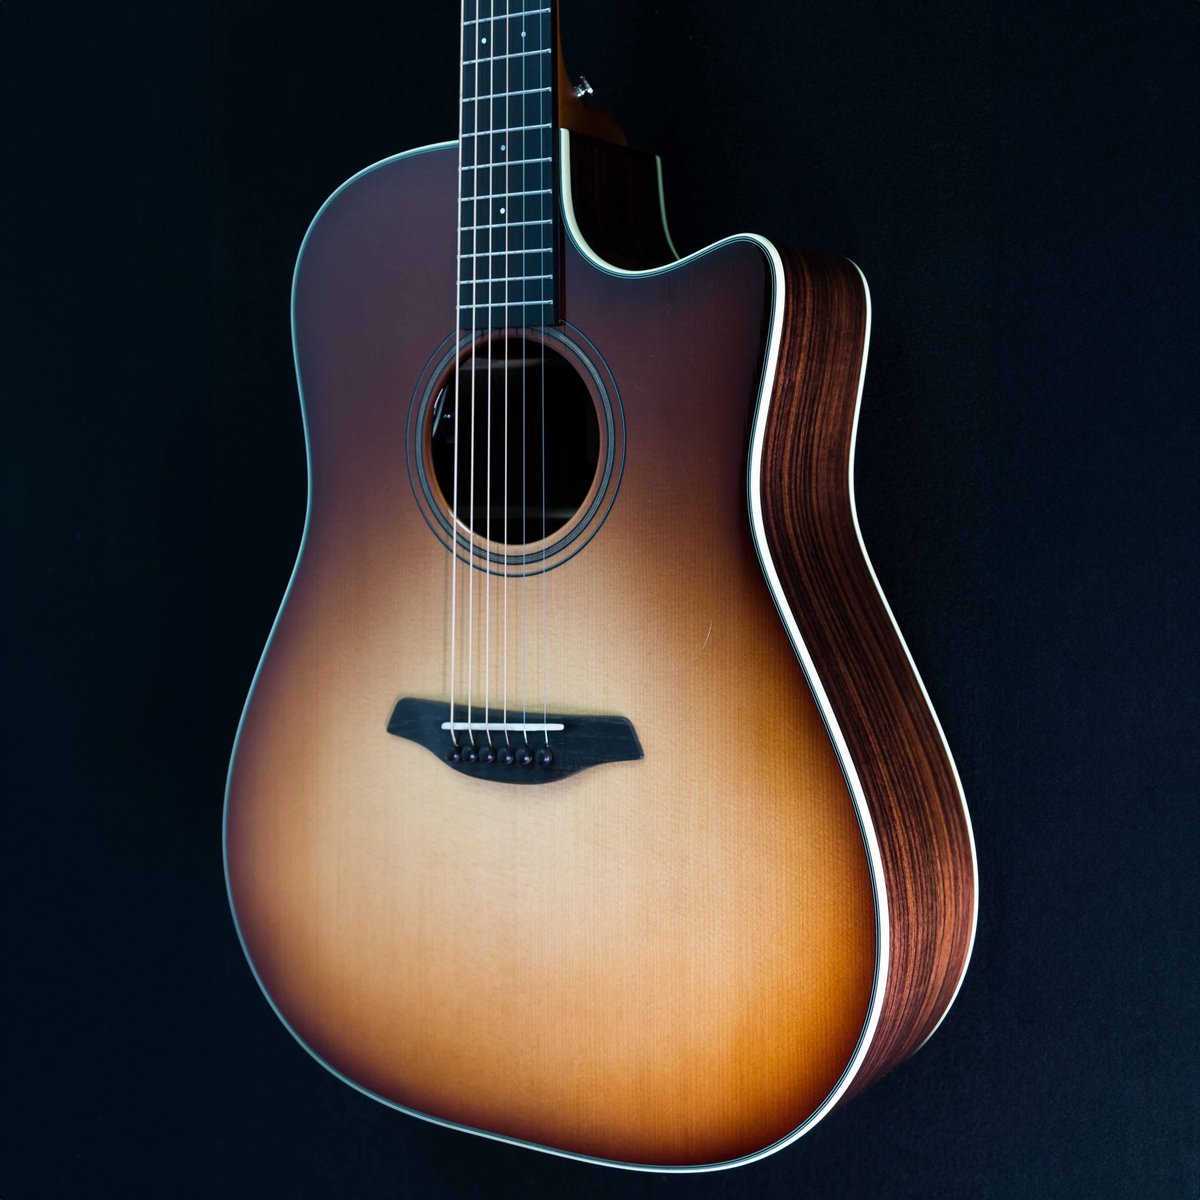 Furch Green Master’s Choice #guitar has a crystalline clear, harmonically rich, balanced, and highly dynamic sound across the entire tonal spectrum. #acousticguitar #acousticmusic #guitarforsale

bluescitymusic.com/collections/fu…